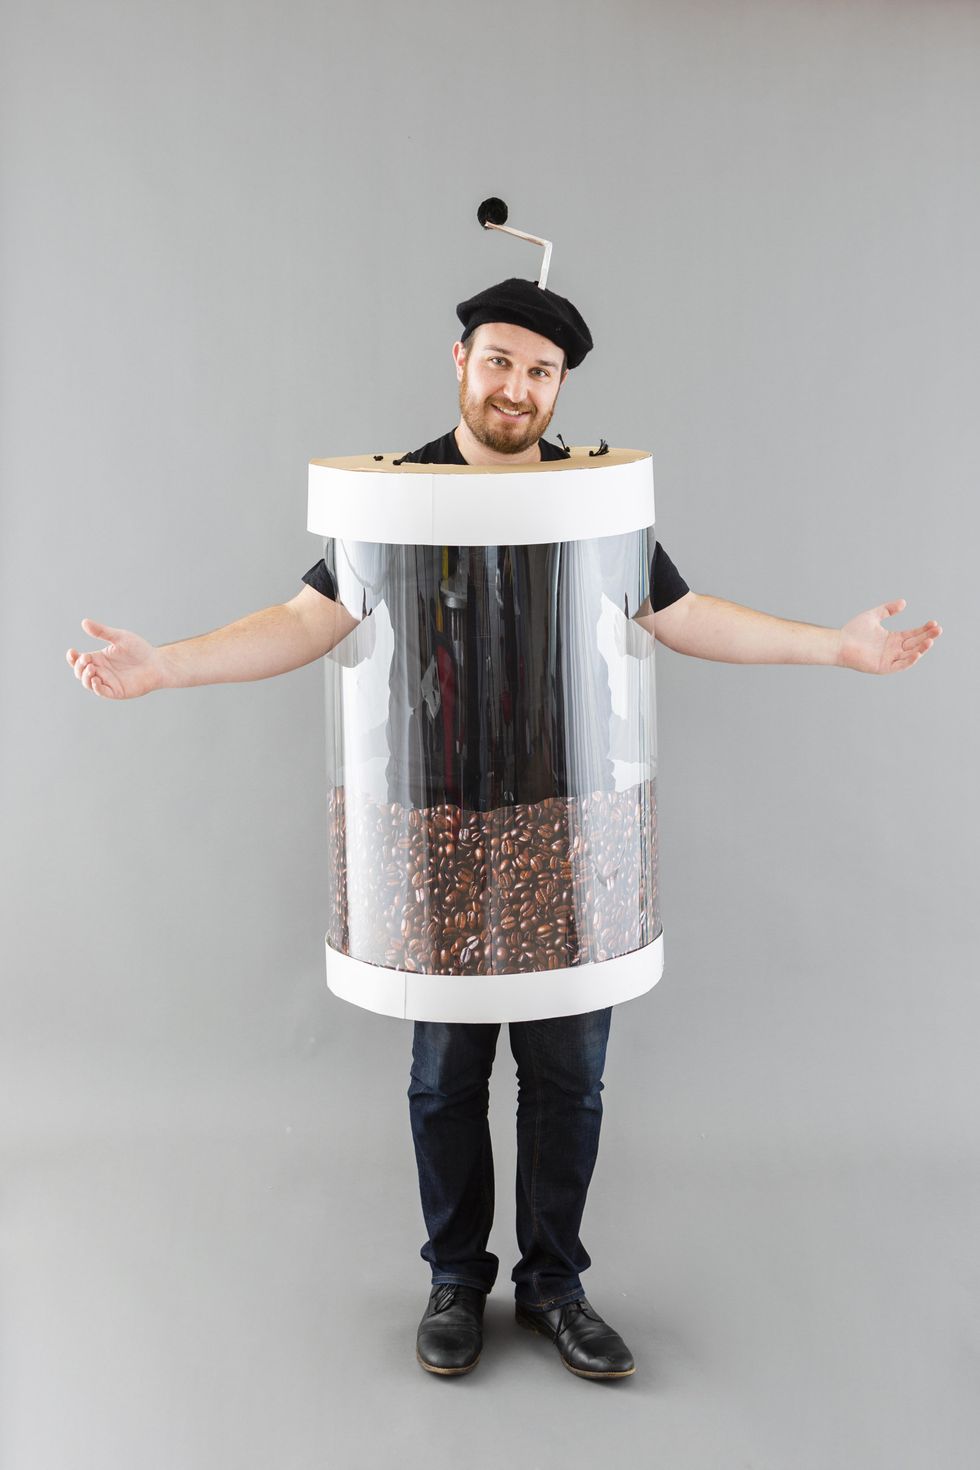 What Are Your Halloween Plans? Here's a Hilarious Costume